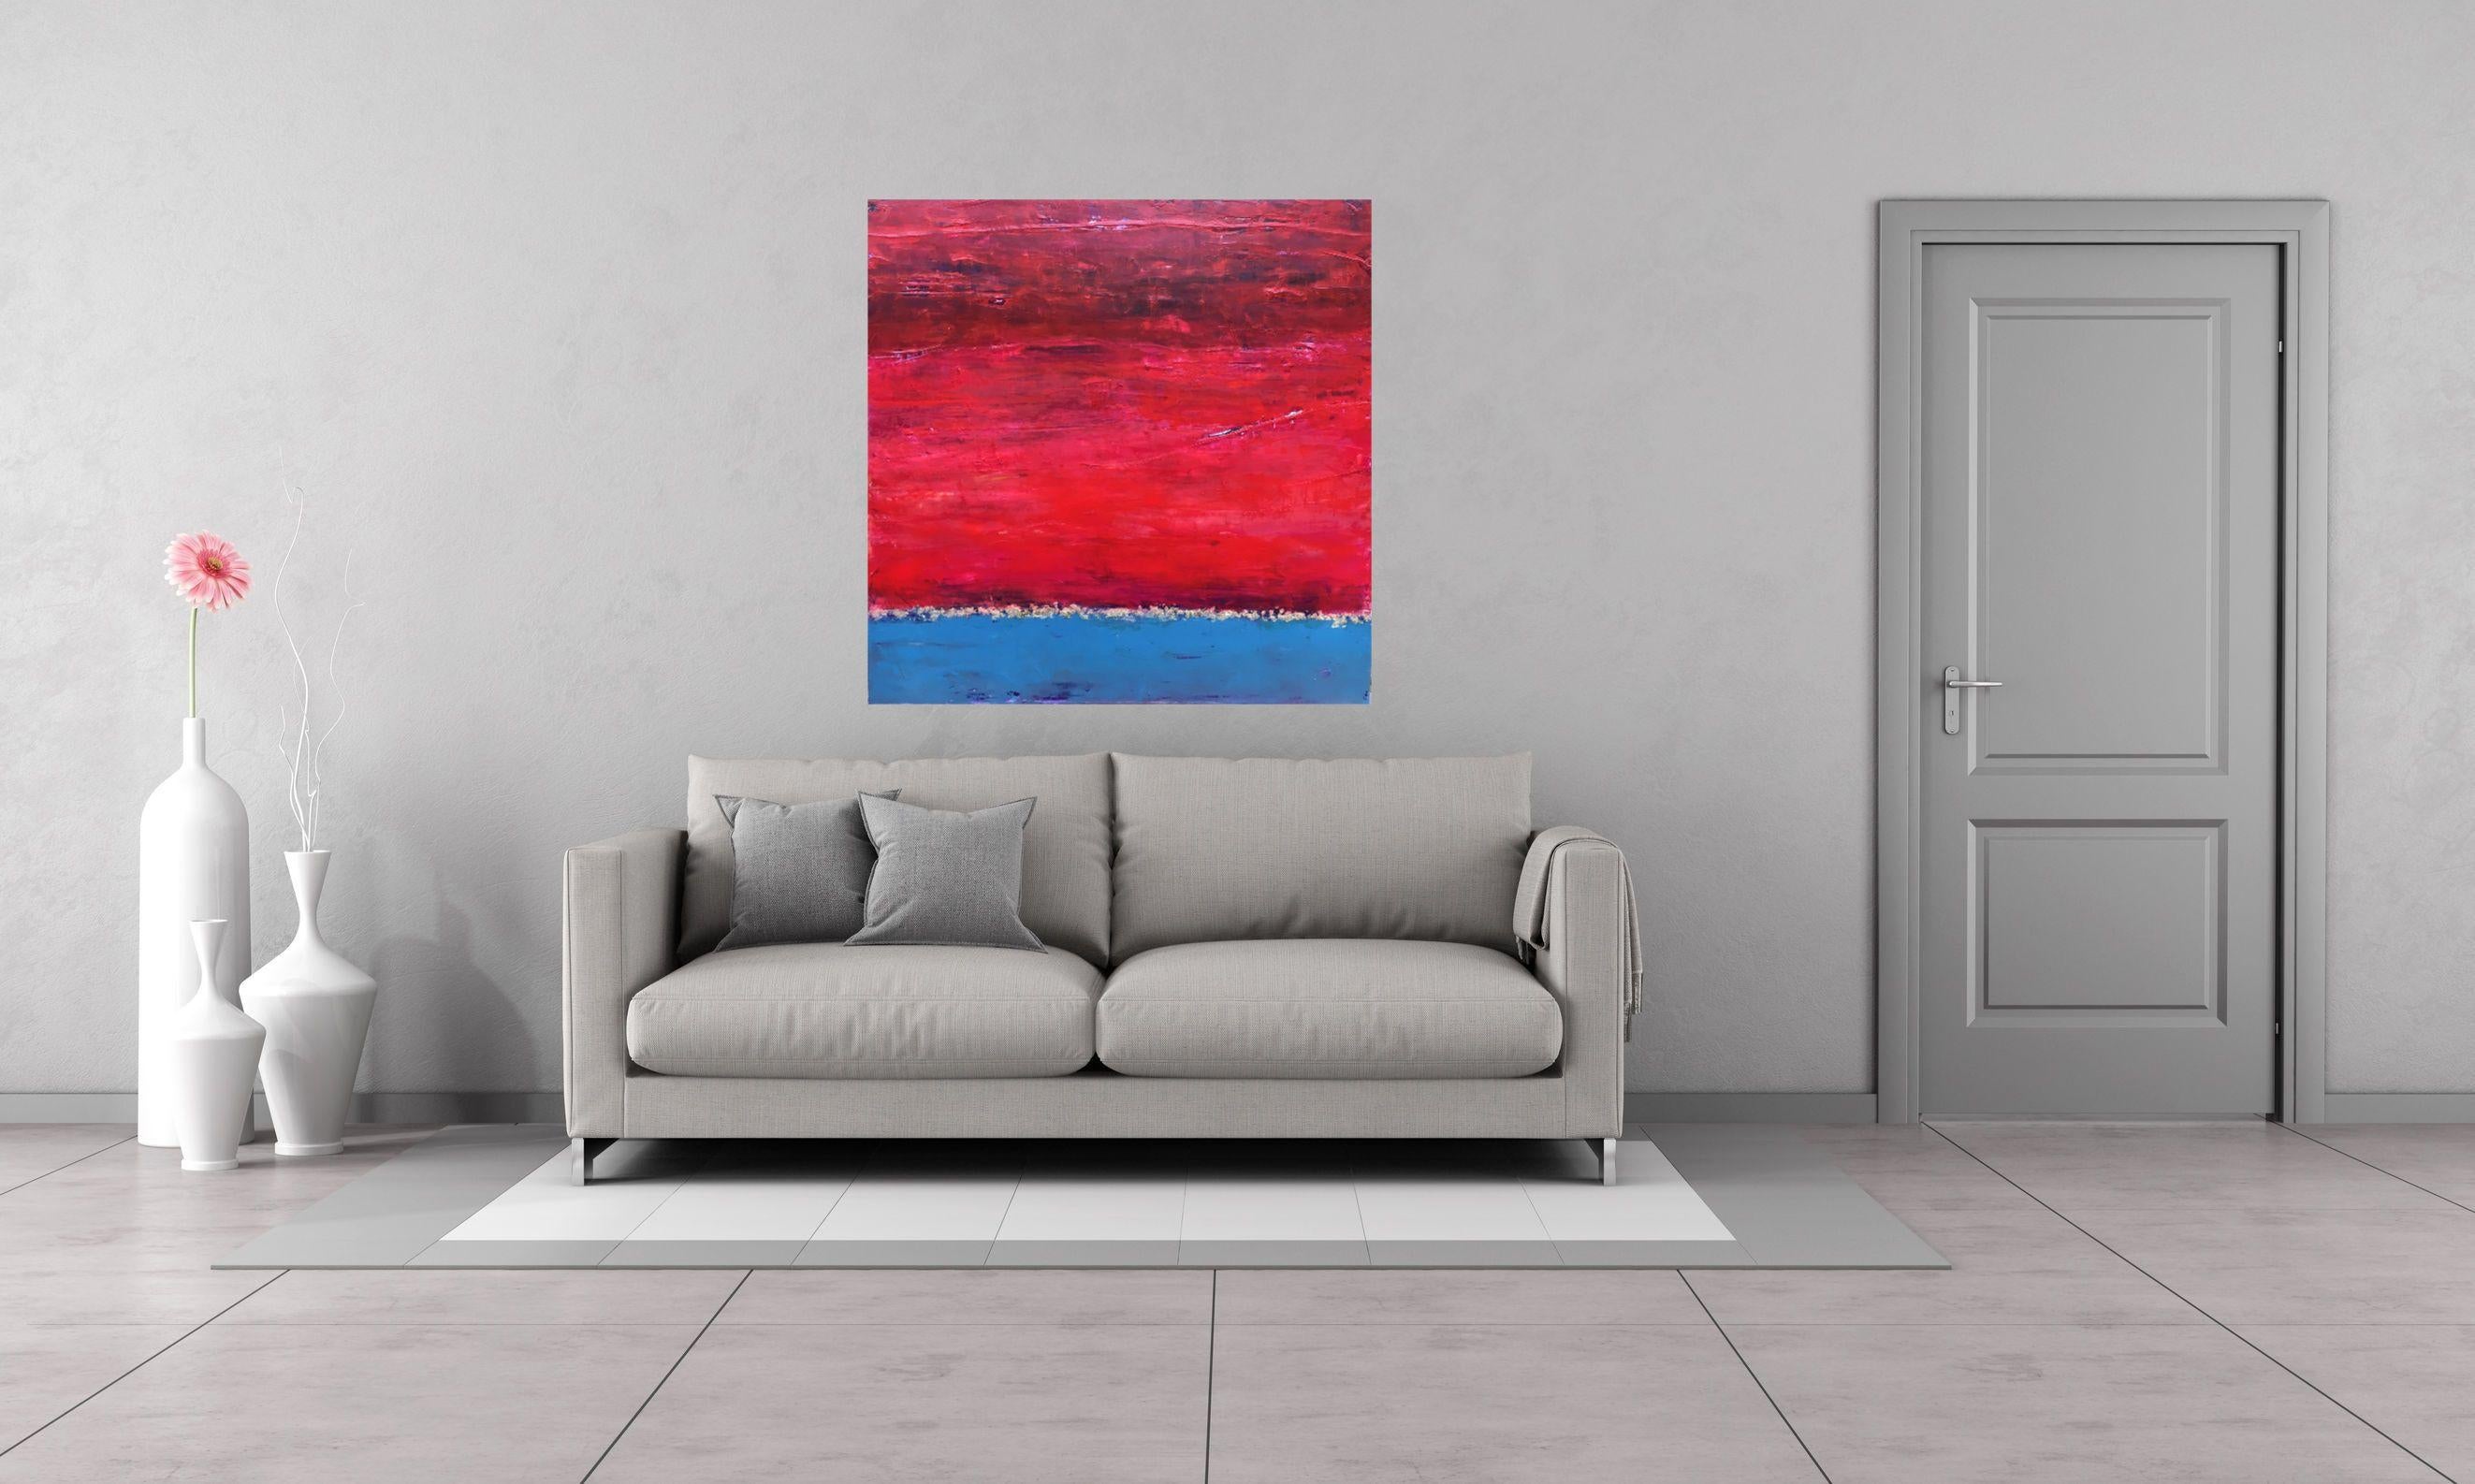 A large, multi layered oil painting with deep reds, purple and grey blue hues. Flecks of gold leaf add interest and sparkle. Inspired by mood rather than imagery. The painting has been built over many layers of oil paint with various degrees of